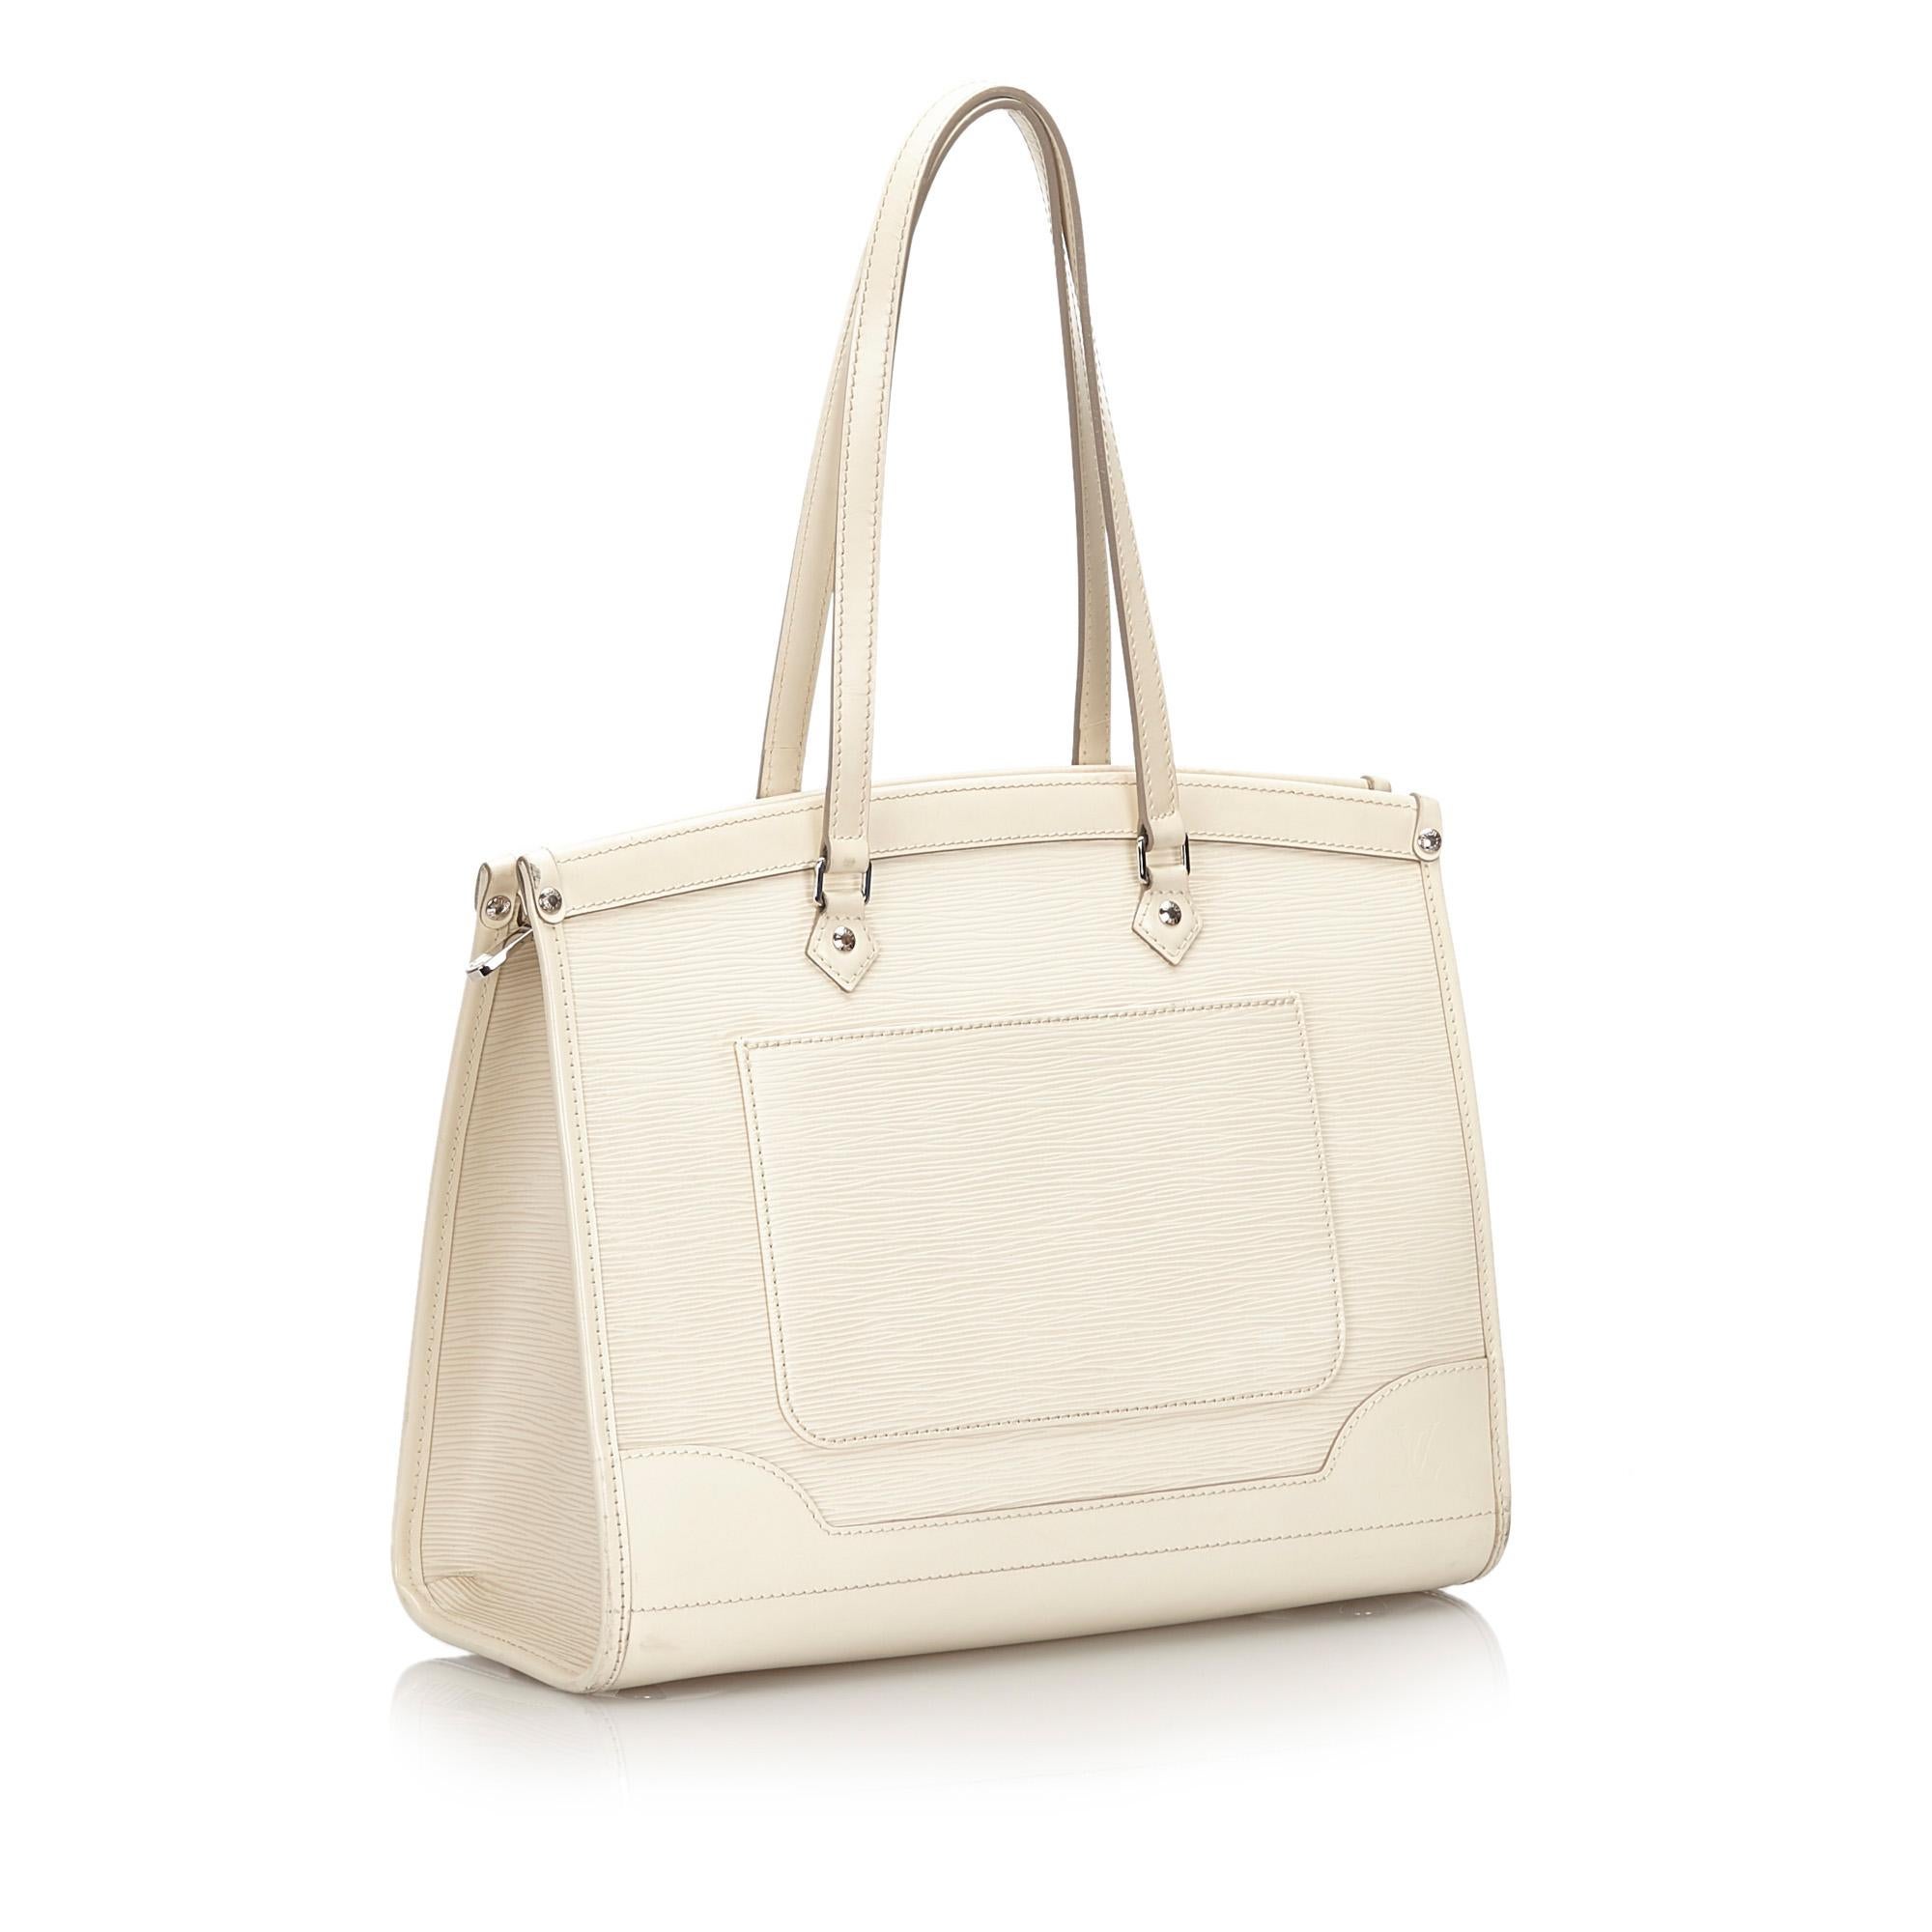 The Madeleine GM features an epi leather body, exterior back slip pocket, flat leather handles, top zip closure, and interior slip pockets. It carries as B+ condition rating.

Inclusions: 
This item does not come with inclusions.


Louis Vuitton